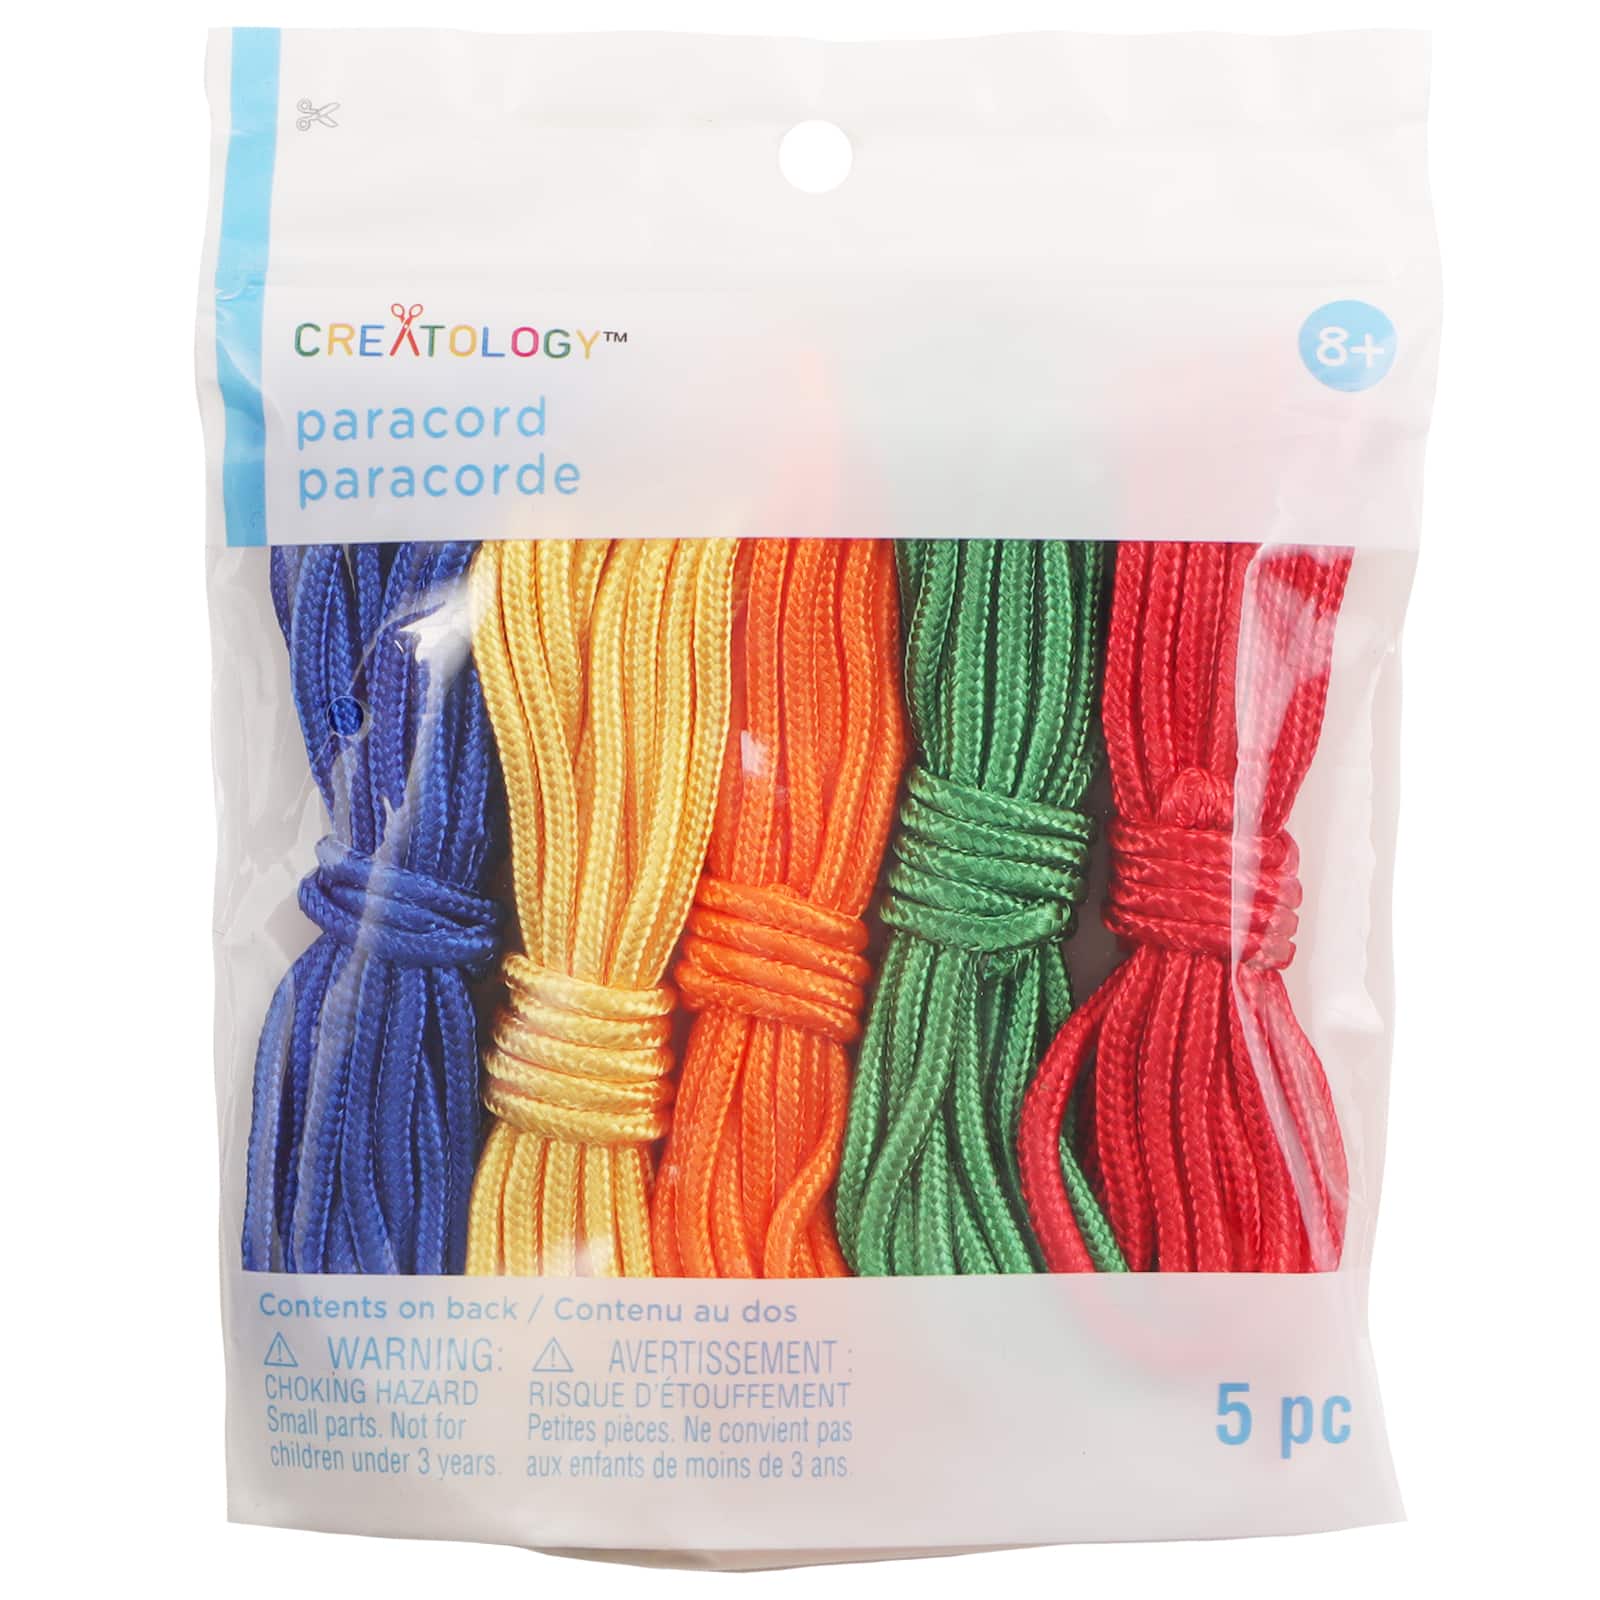 9 Pack: My 1st Paracord Kit by Creatology™